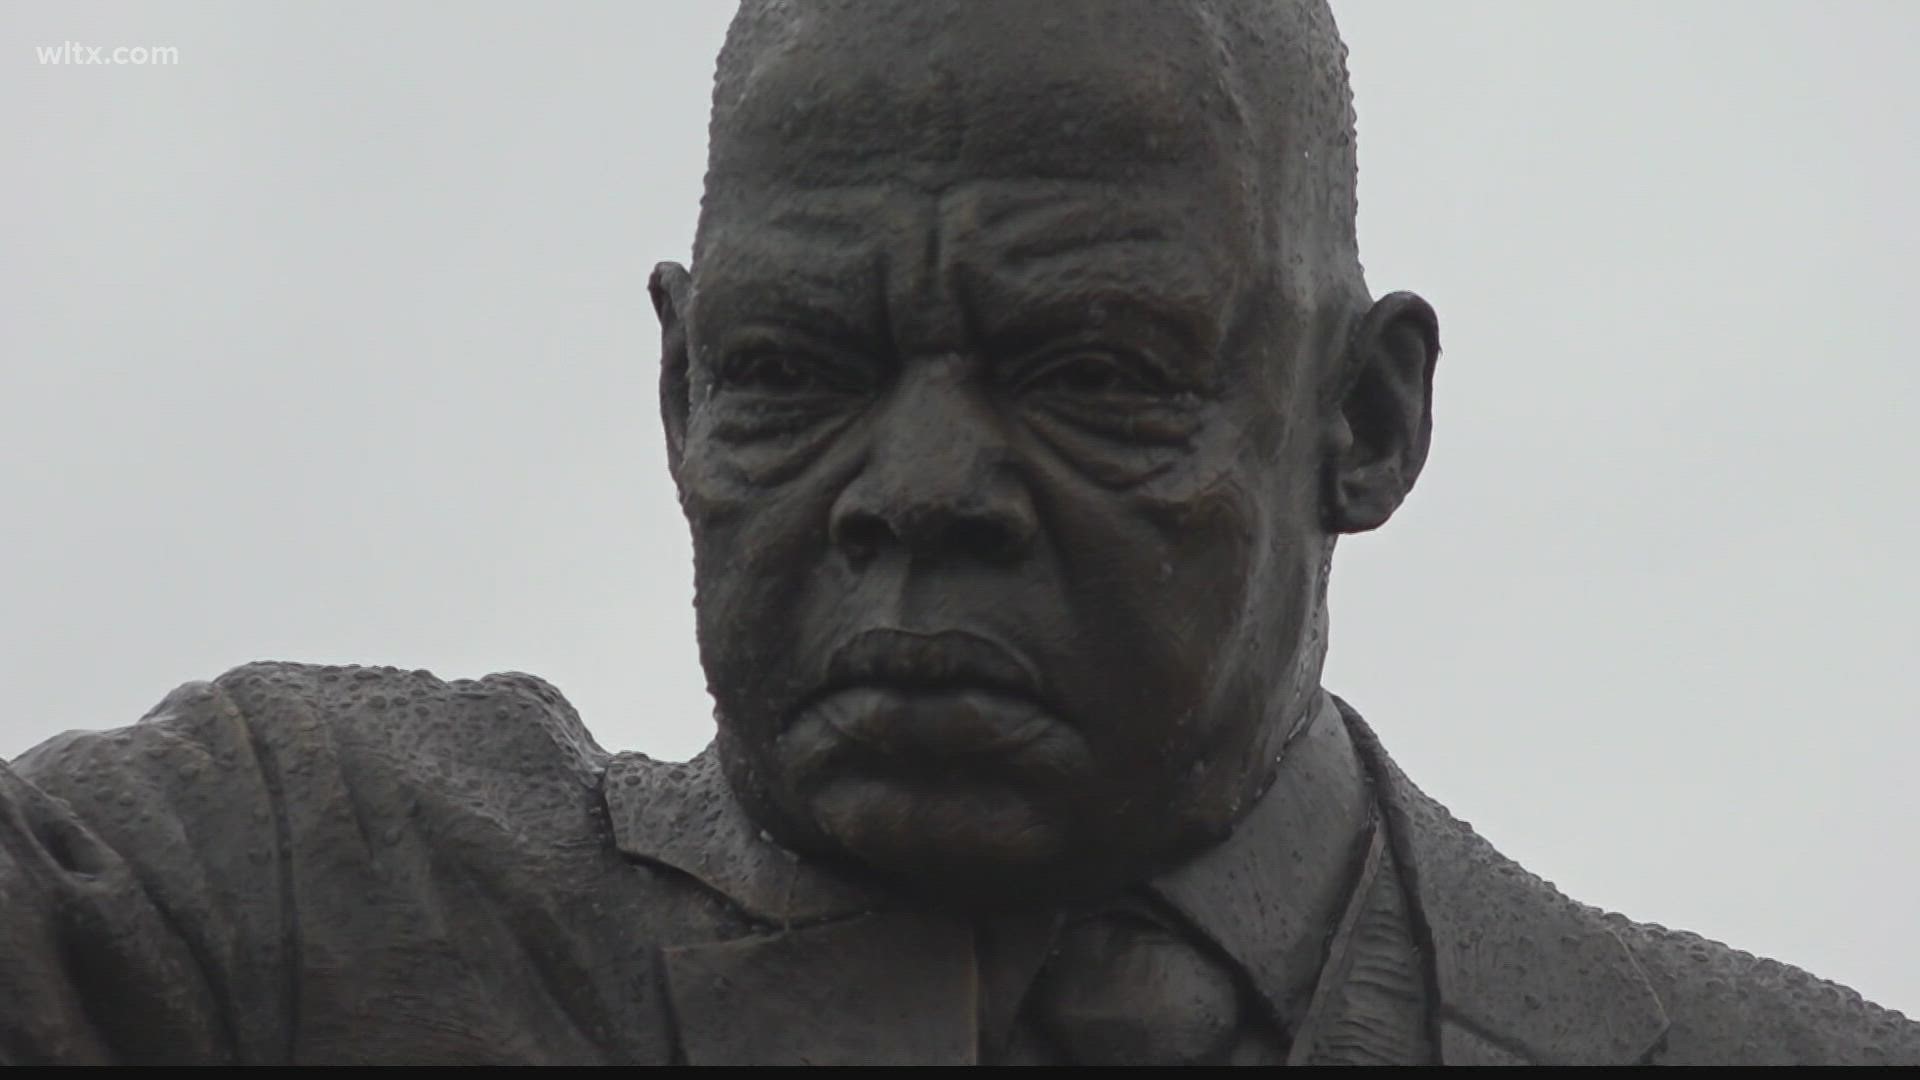 The statue of John Lewis is on temporary exhibit at South Carolina State University.